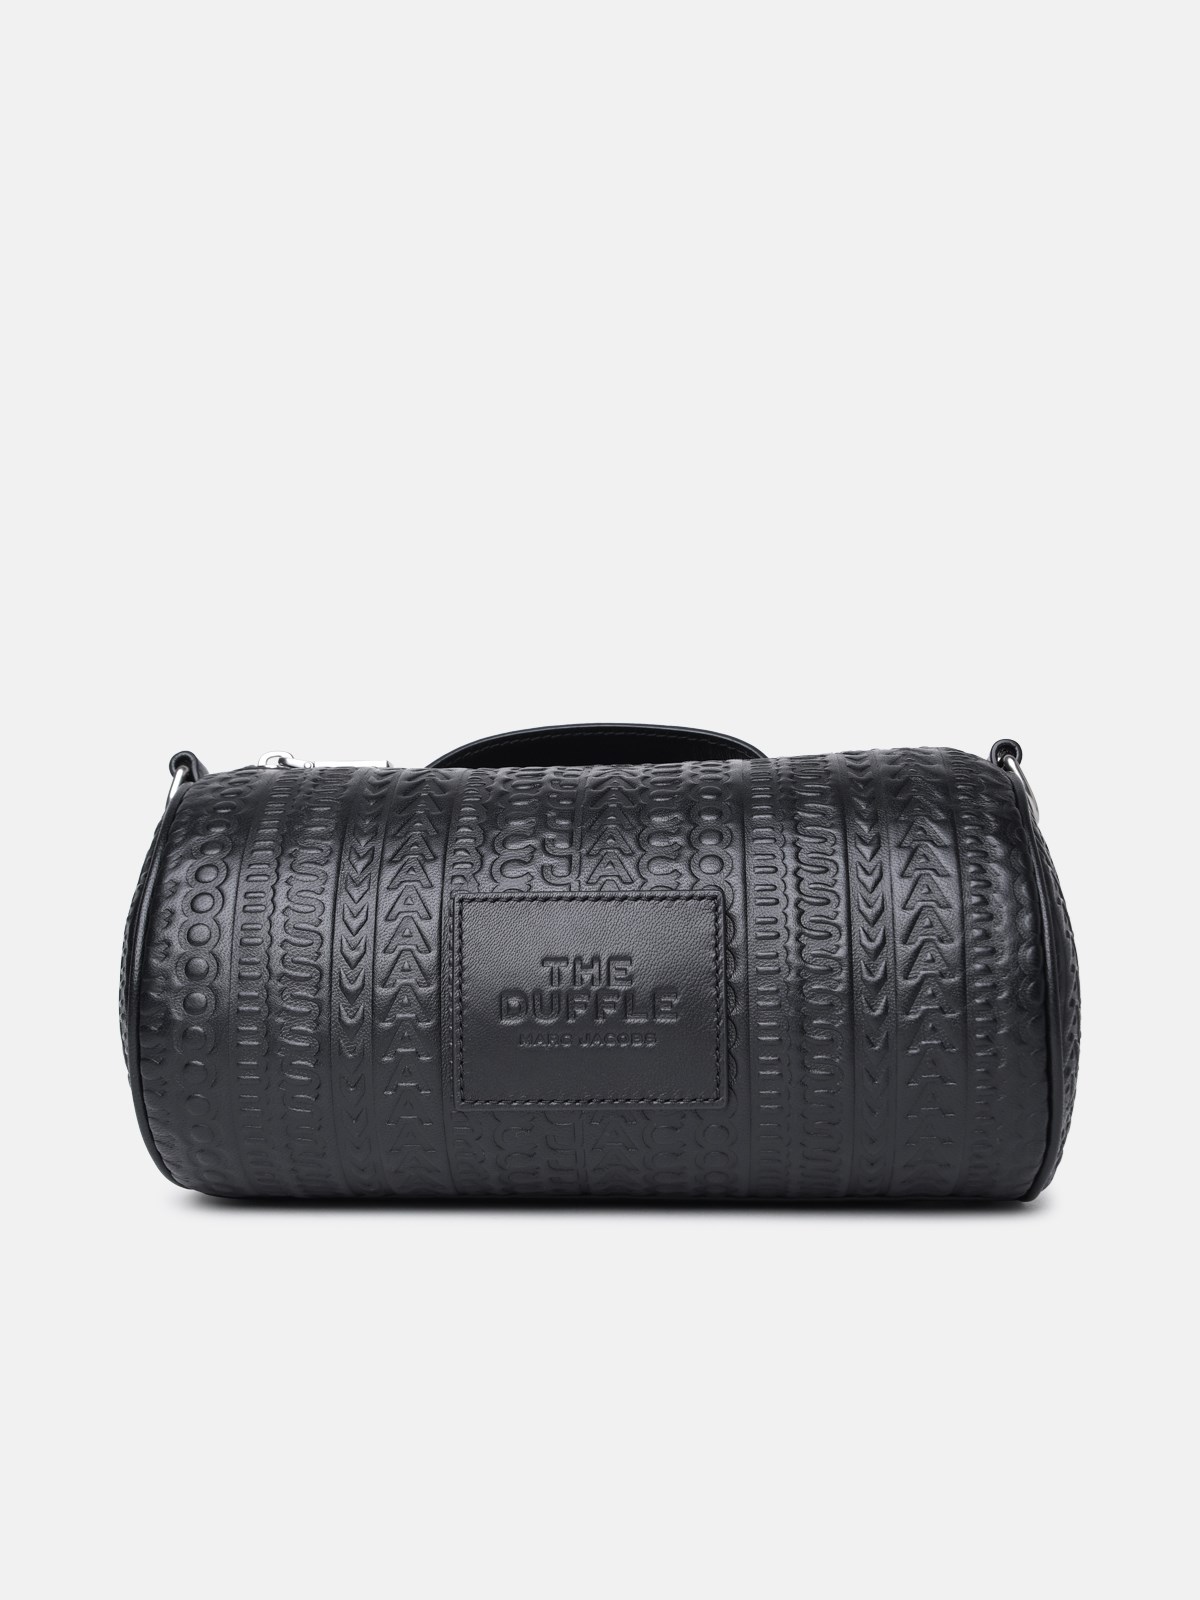 Marc Jacobs (the) 'duffle' Black Leather Bag